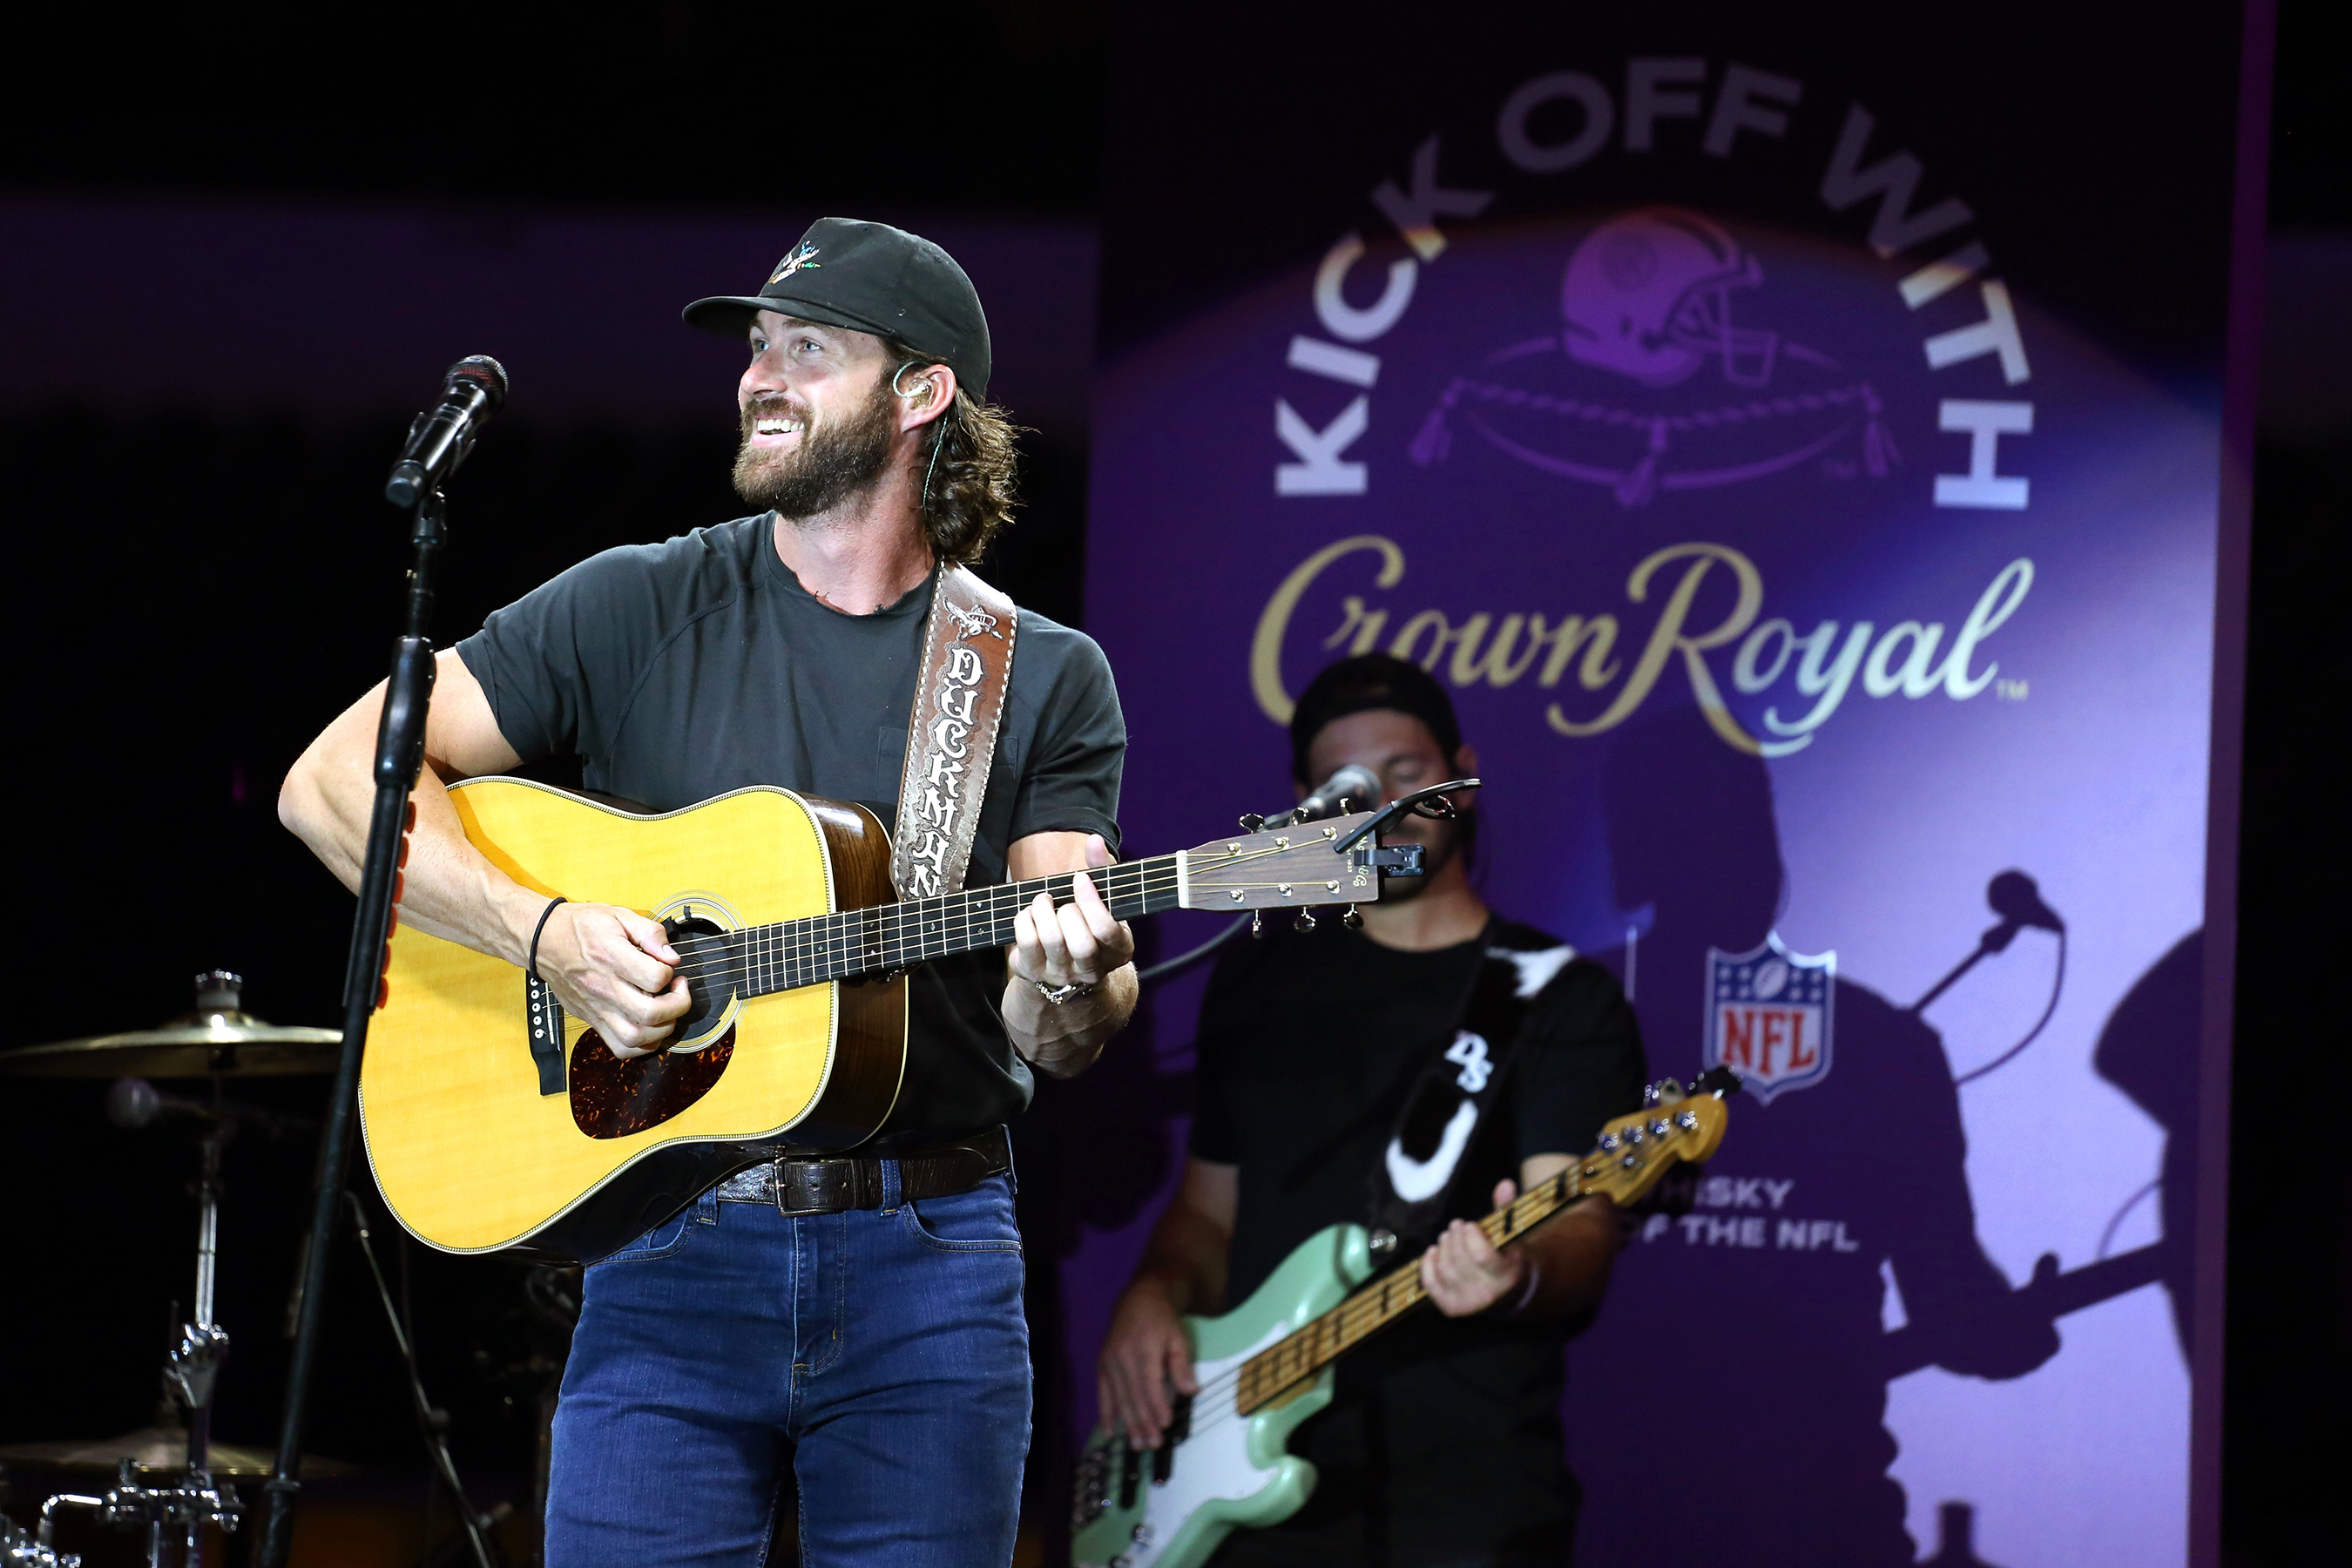 Country music star Riley Green performs at the Crown Royal Industry Night of Service Generosity Hour, celebrating hospitality and stadium workers in Dallas, Texas at AT&T Stadium.